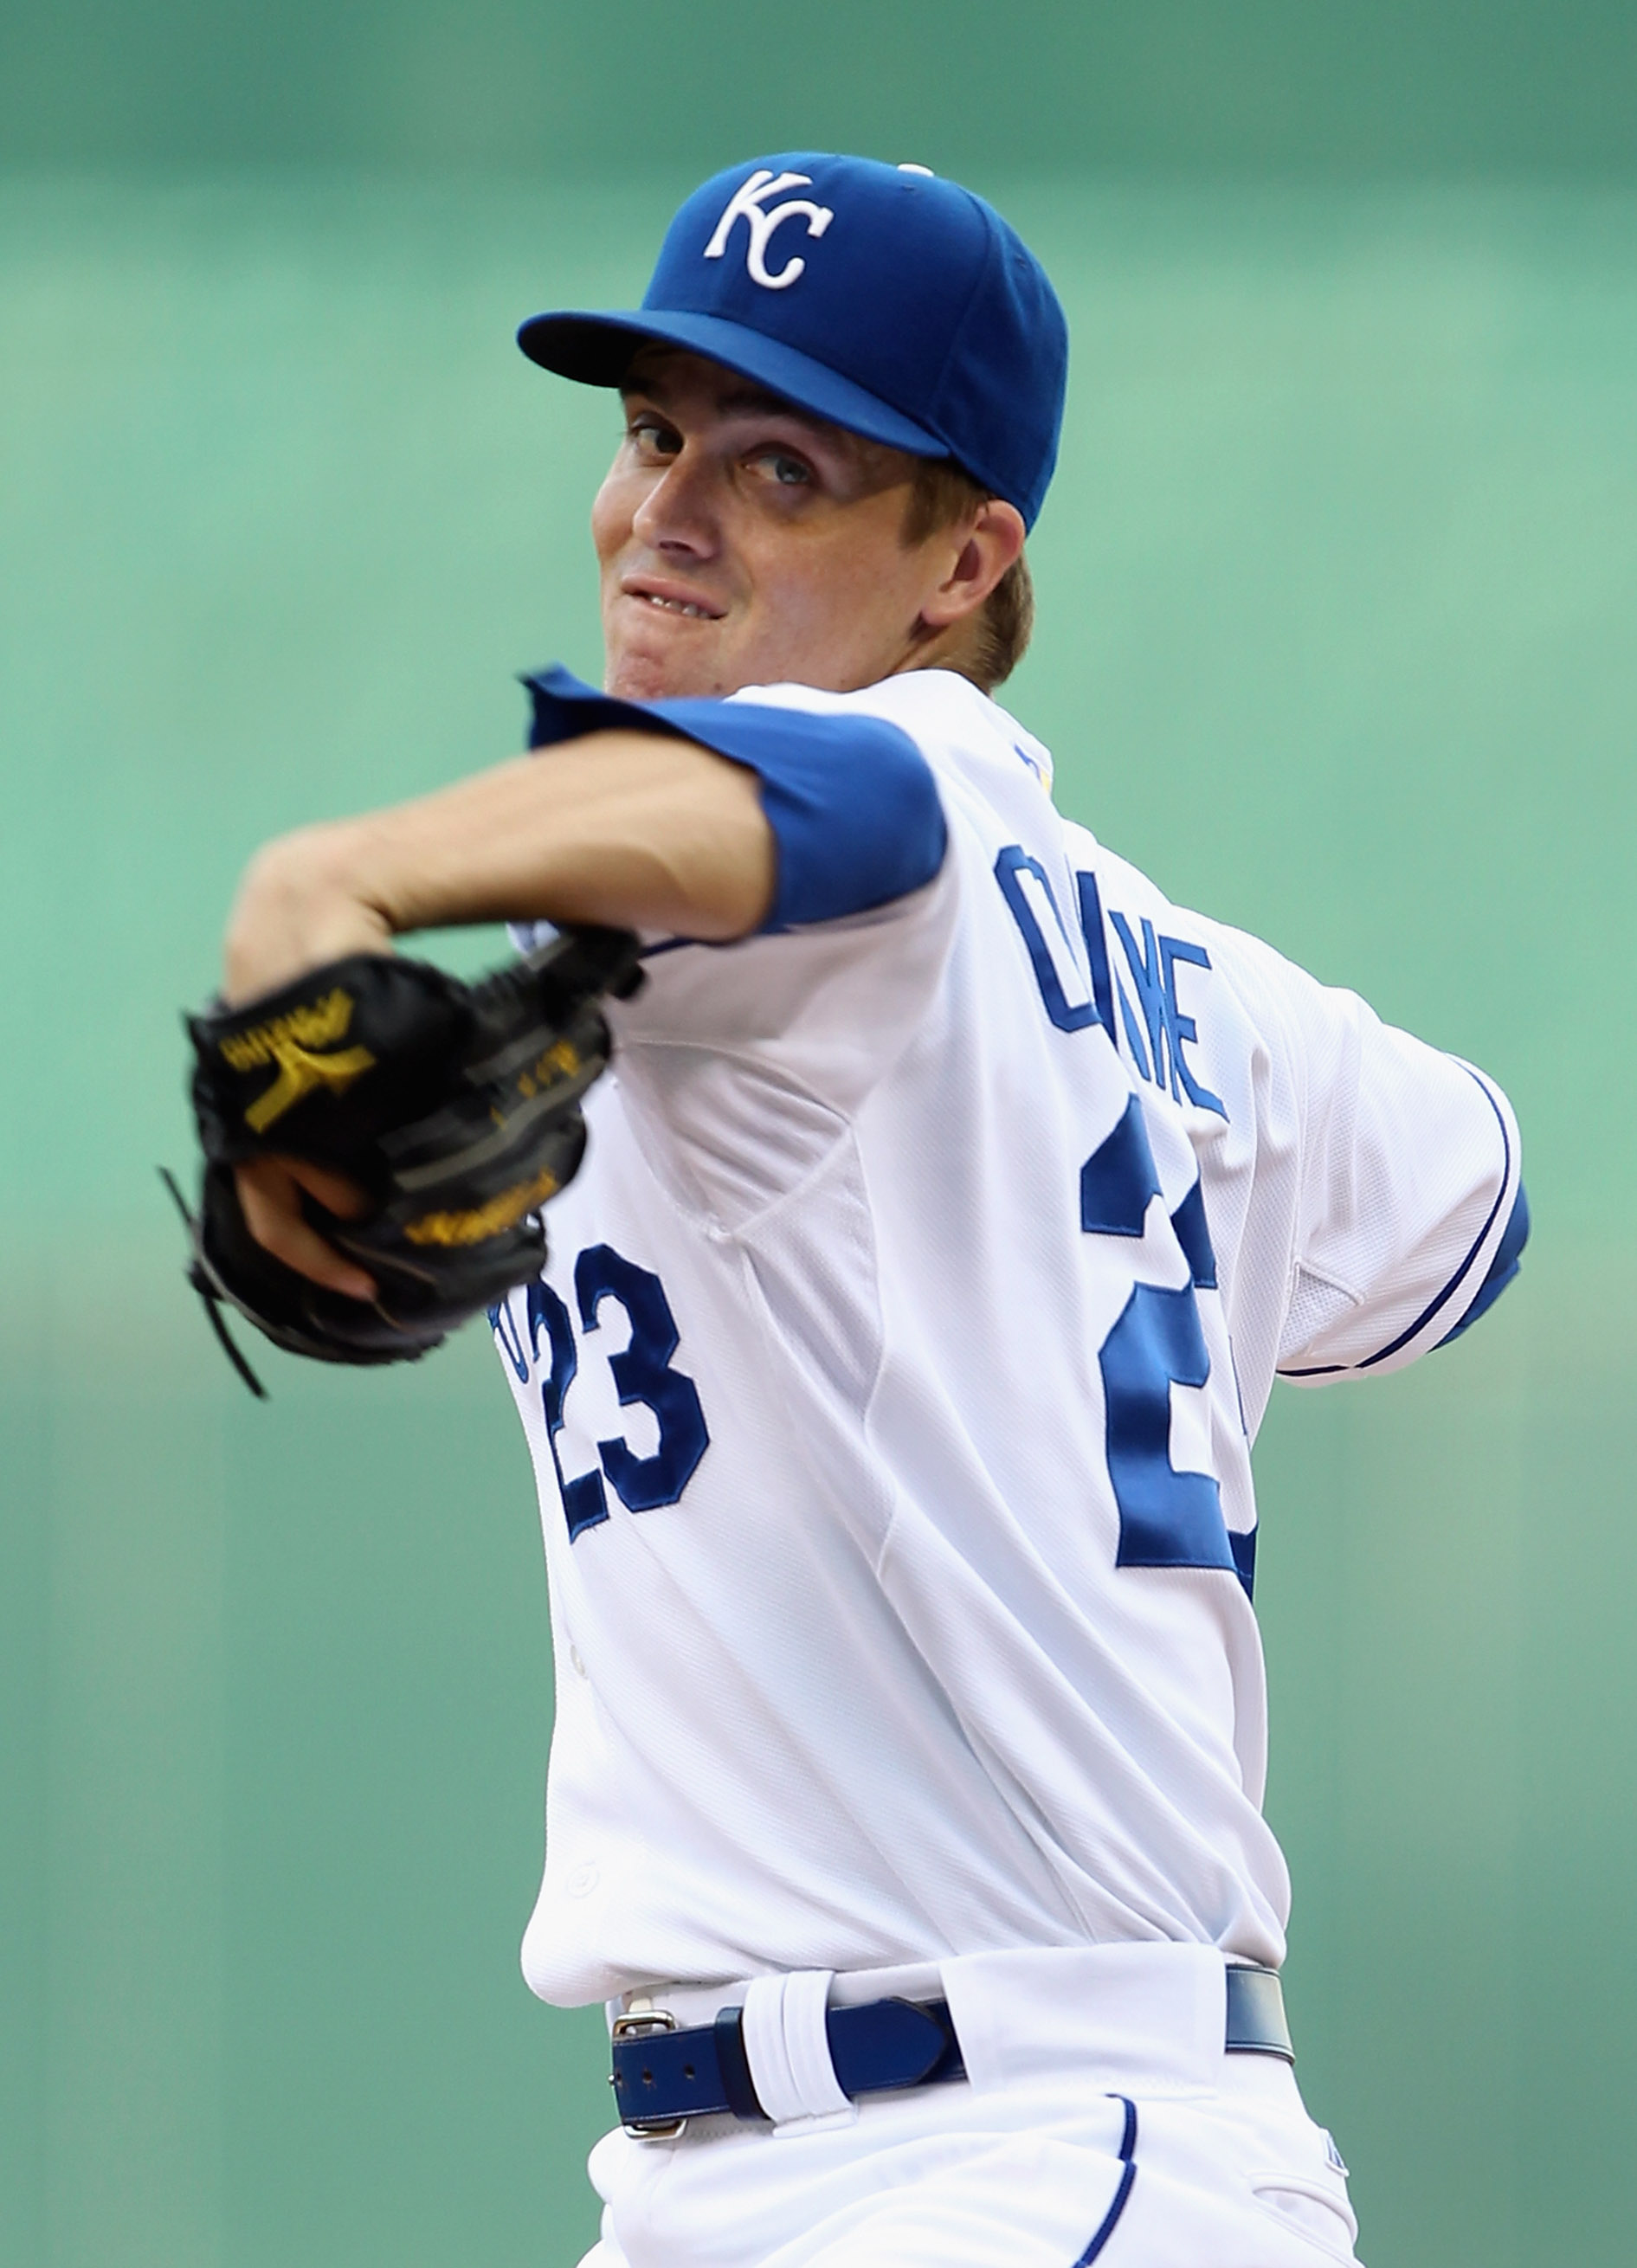 KANSAS CITY, MO - JULY 26:  Starting pitcher Zack Greinke #23 of the Kansas City Royals warms-up prior to the start of the game against the Minnesota Twins on July 26, 2010 at Kauffman Stadium in Kansas City, Missouri.  (Photo by Jamie Squire/Getty Images